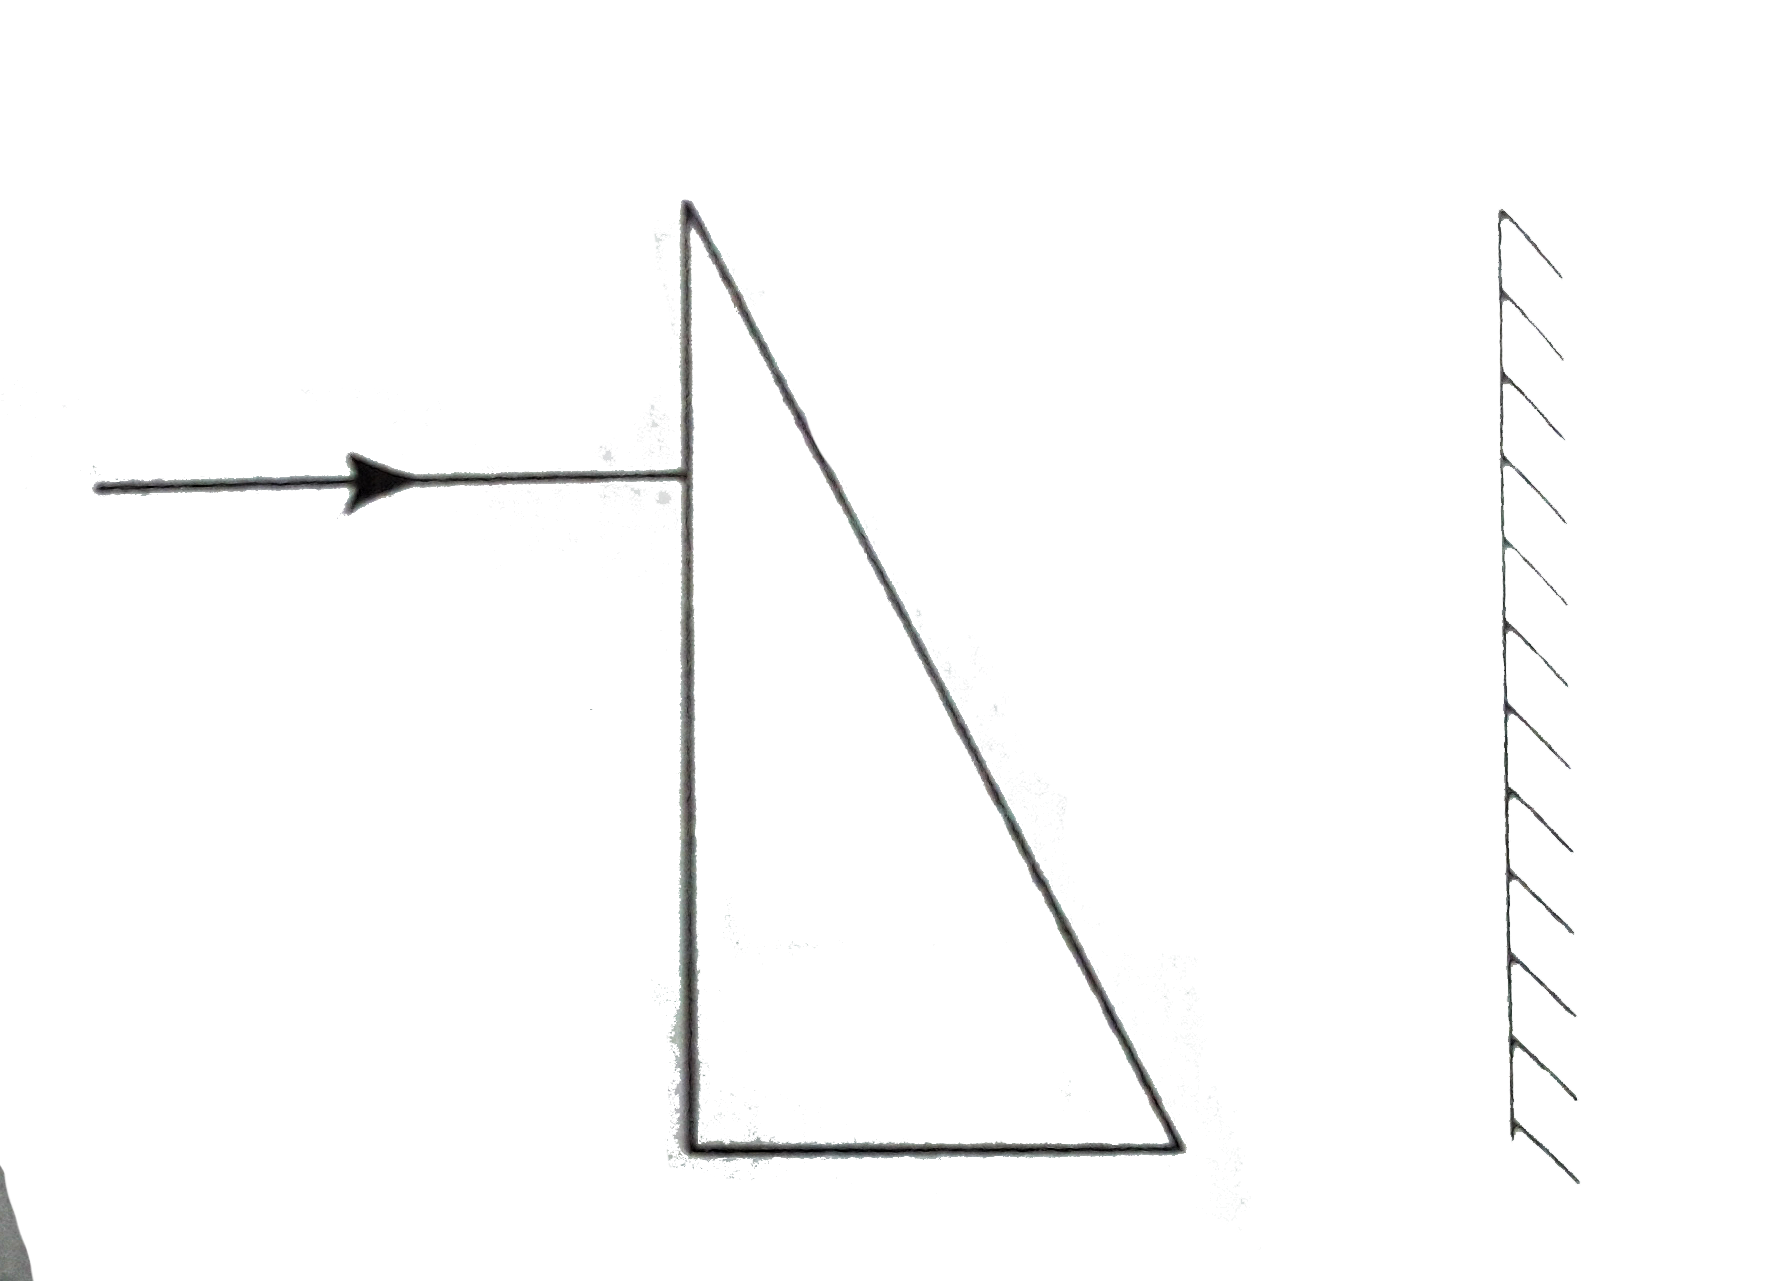 A right-angled prism of apex angle 4^(@) and refractive index 1.5 is located in front of a vertical plane mirror as shown in figure. A horizontal ray of light is falling on the prism. Find the total deviation produced in the light ray as it emerges 2nd time from the prism.